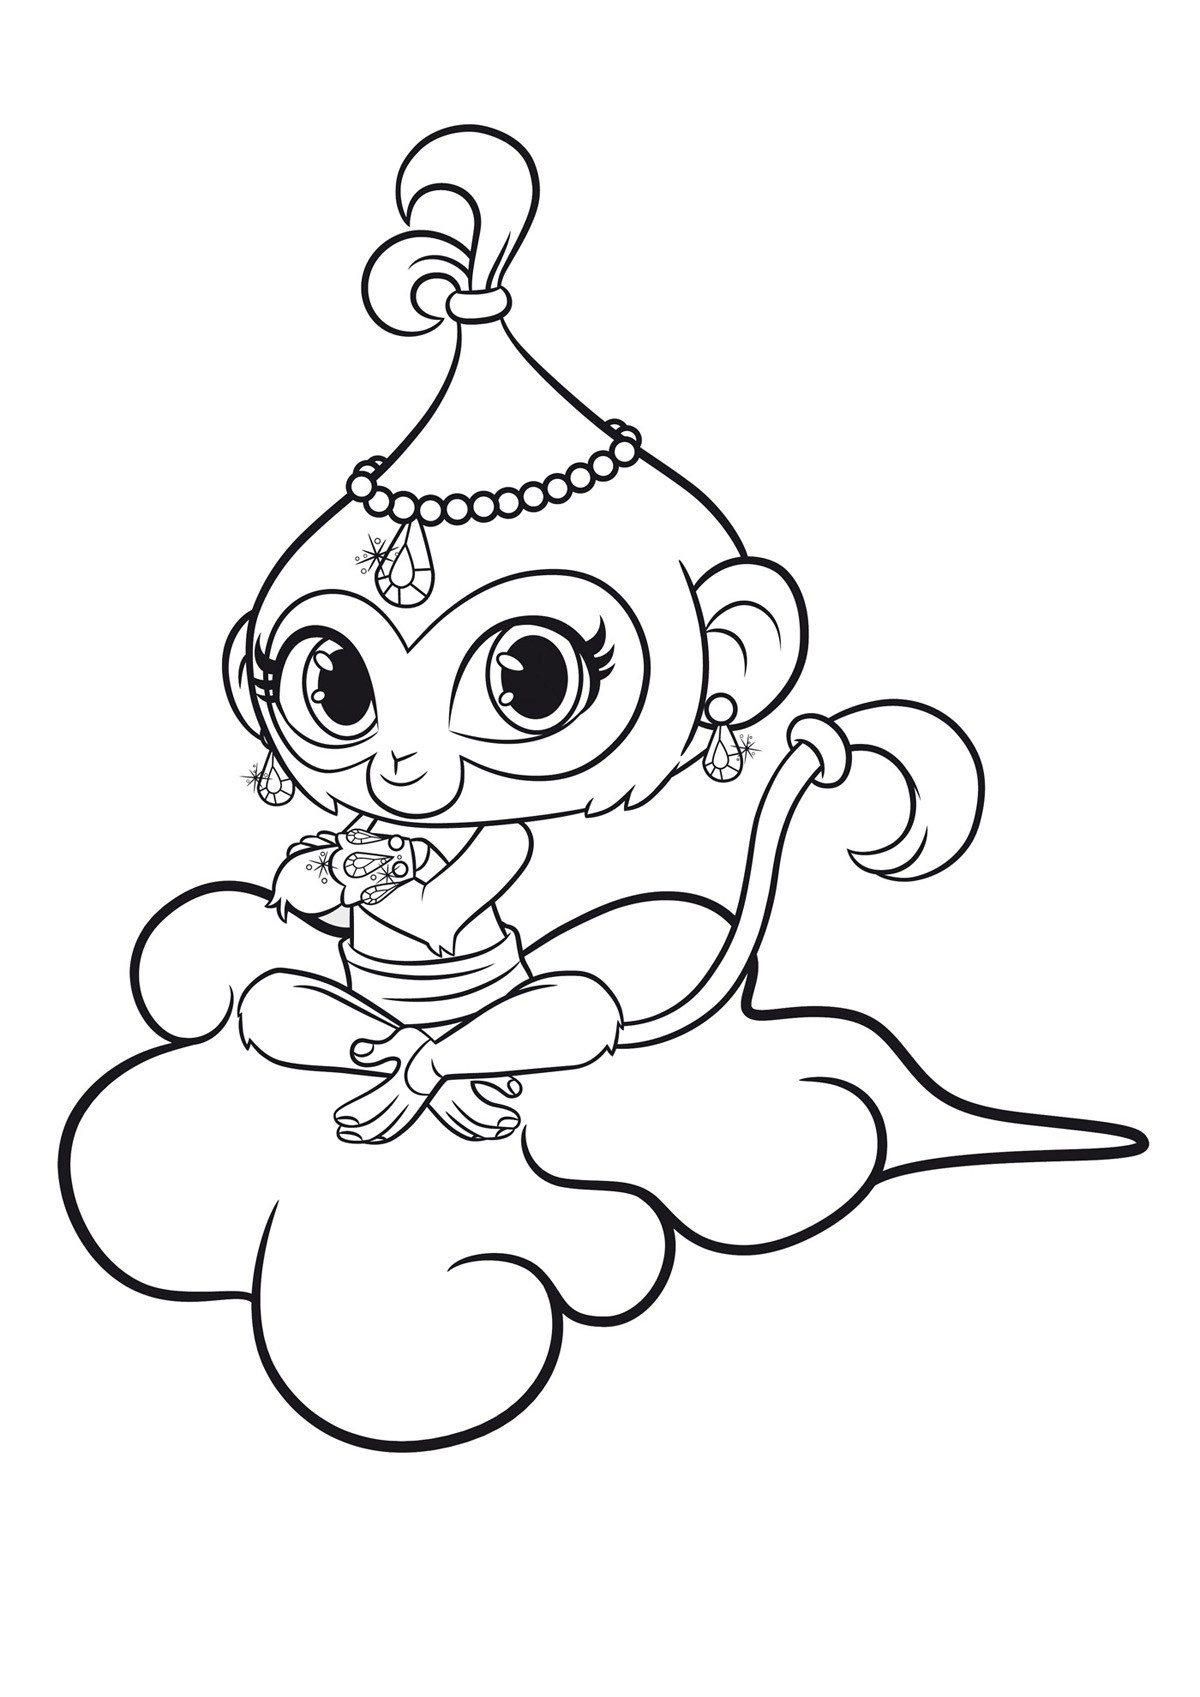 Coloring Pages : Best Of Shimmer And Shine Coloring Pages ...